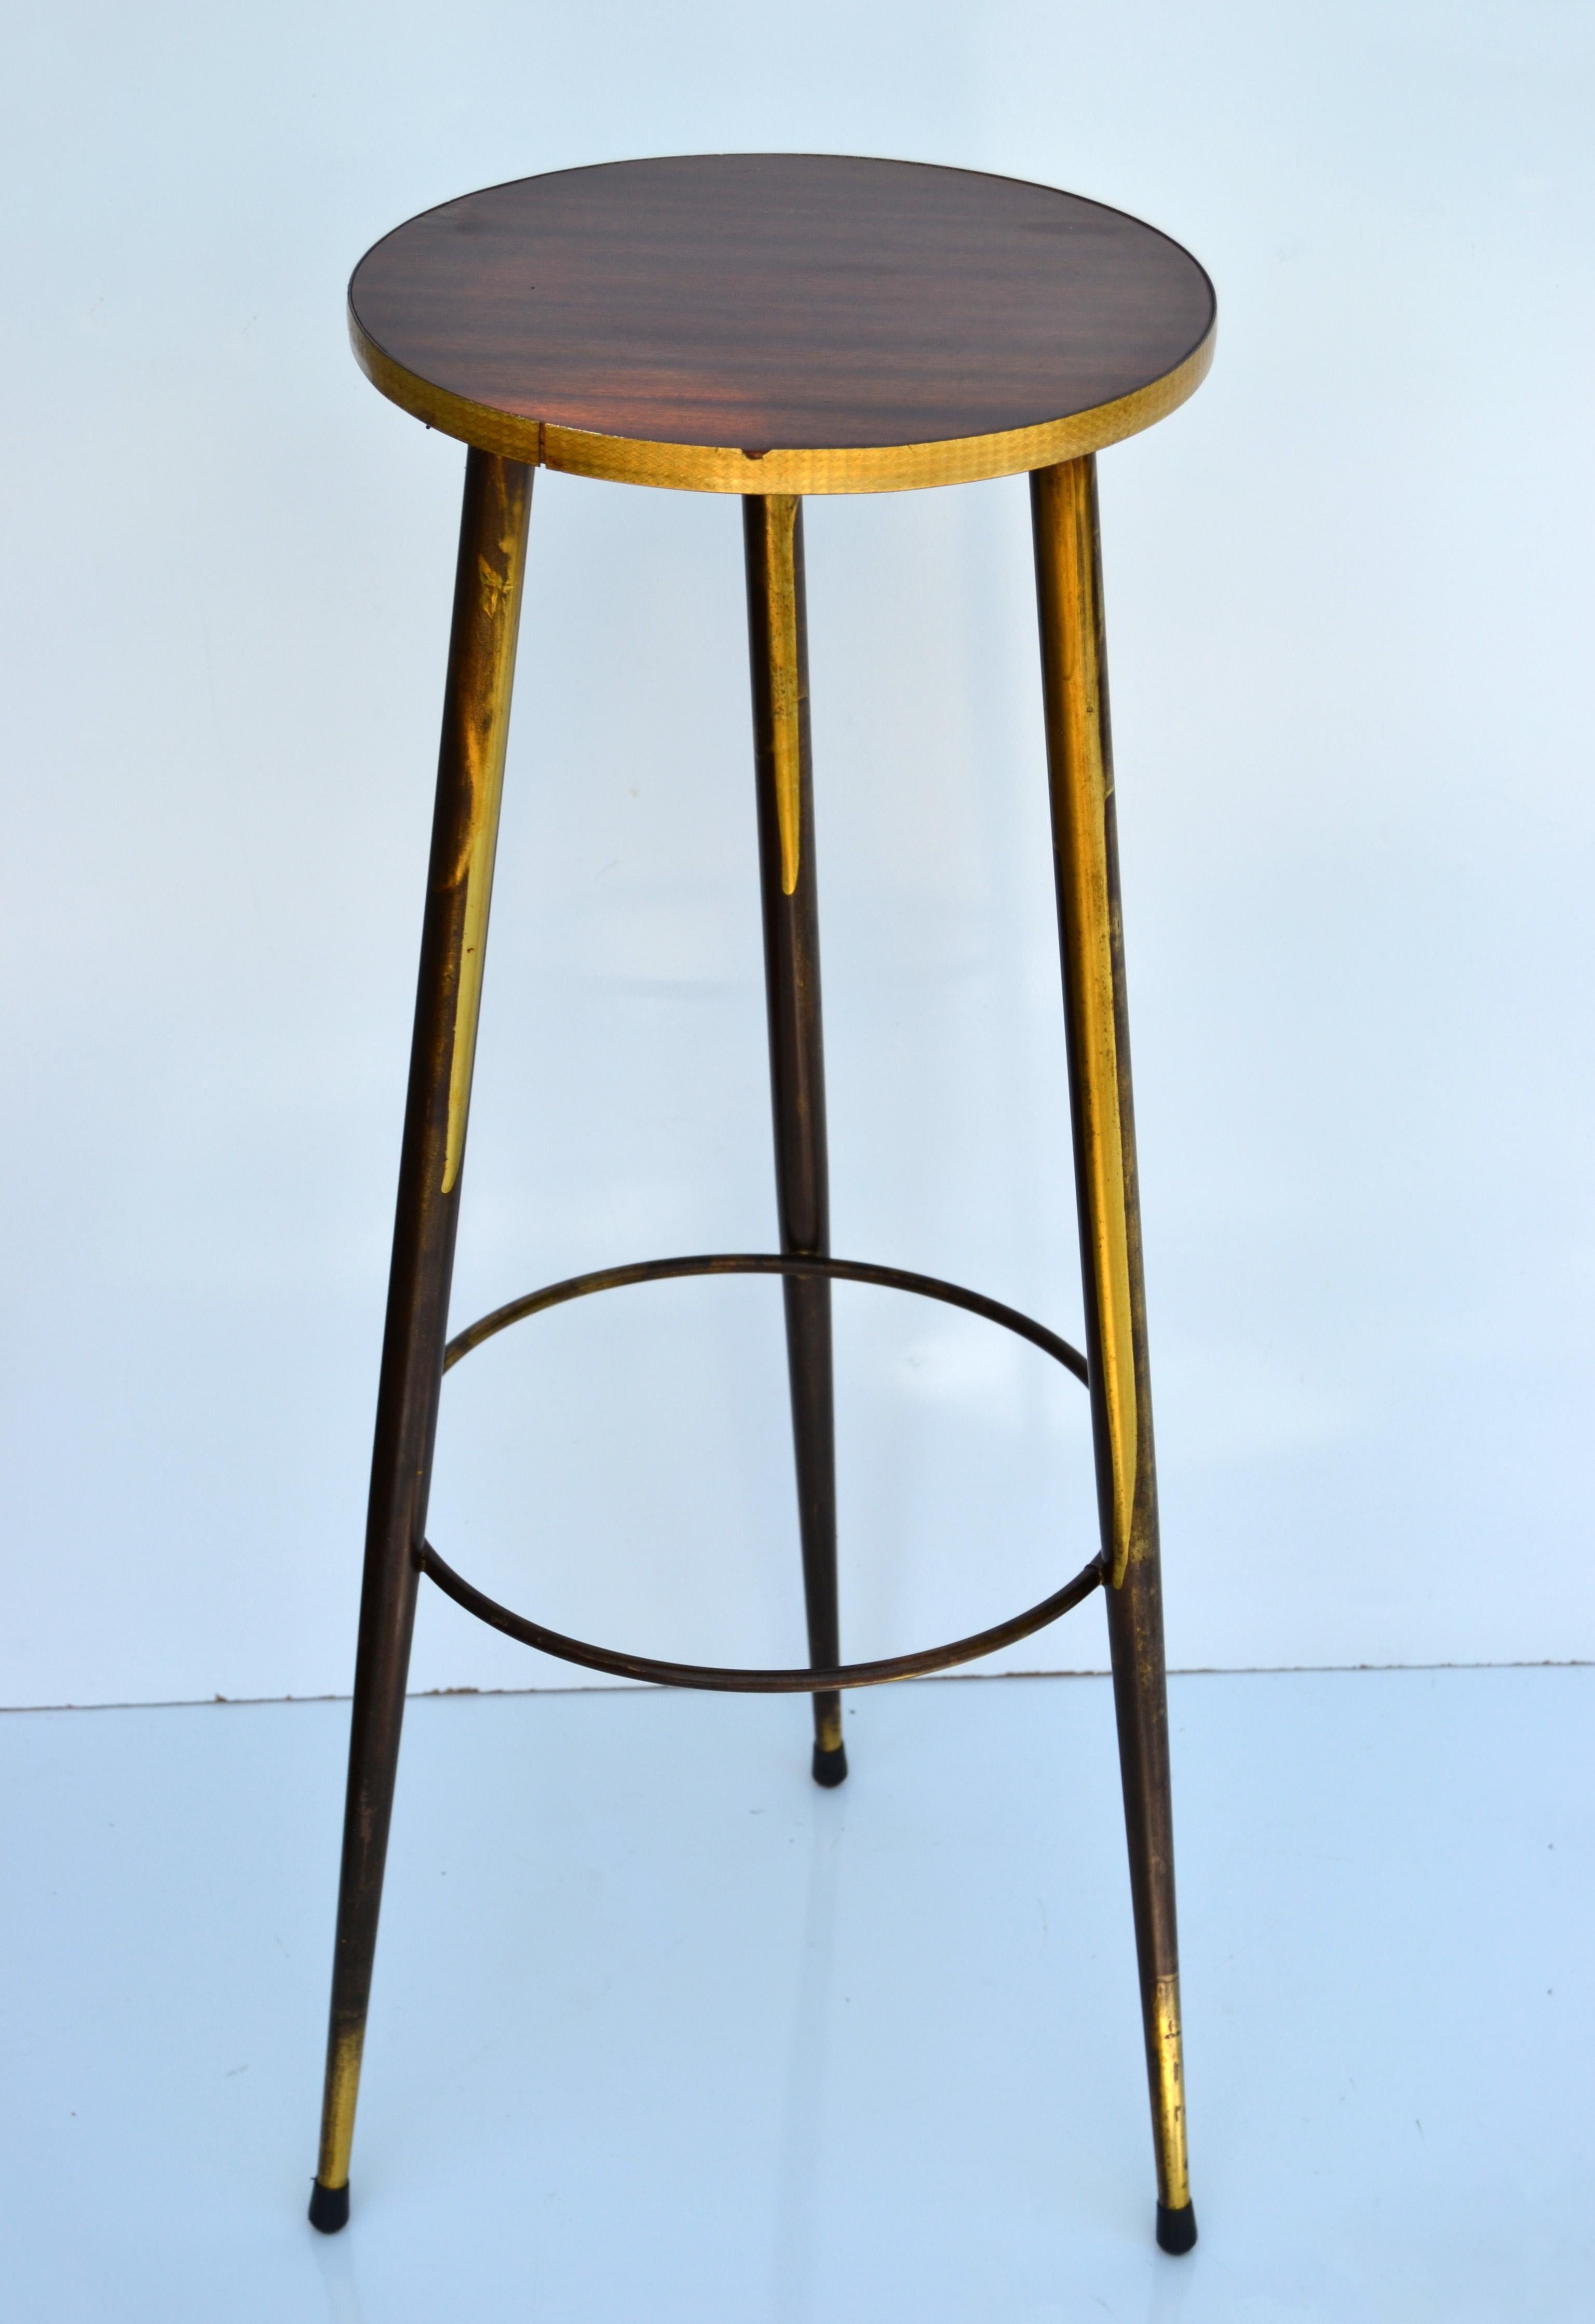 Mid-Century Modern tripod bronze round drink table with laminate top and decorative brass banding.
Left in the original Patina and can be polished to perfection for an additional charge. 
The brass banding has two chips.
Top measures 11 inches